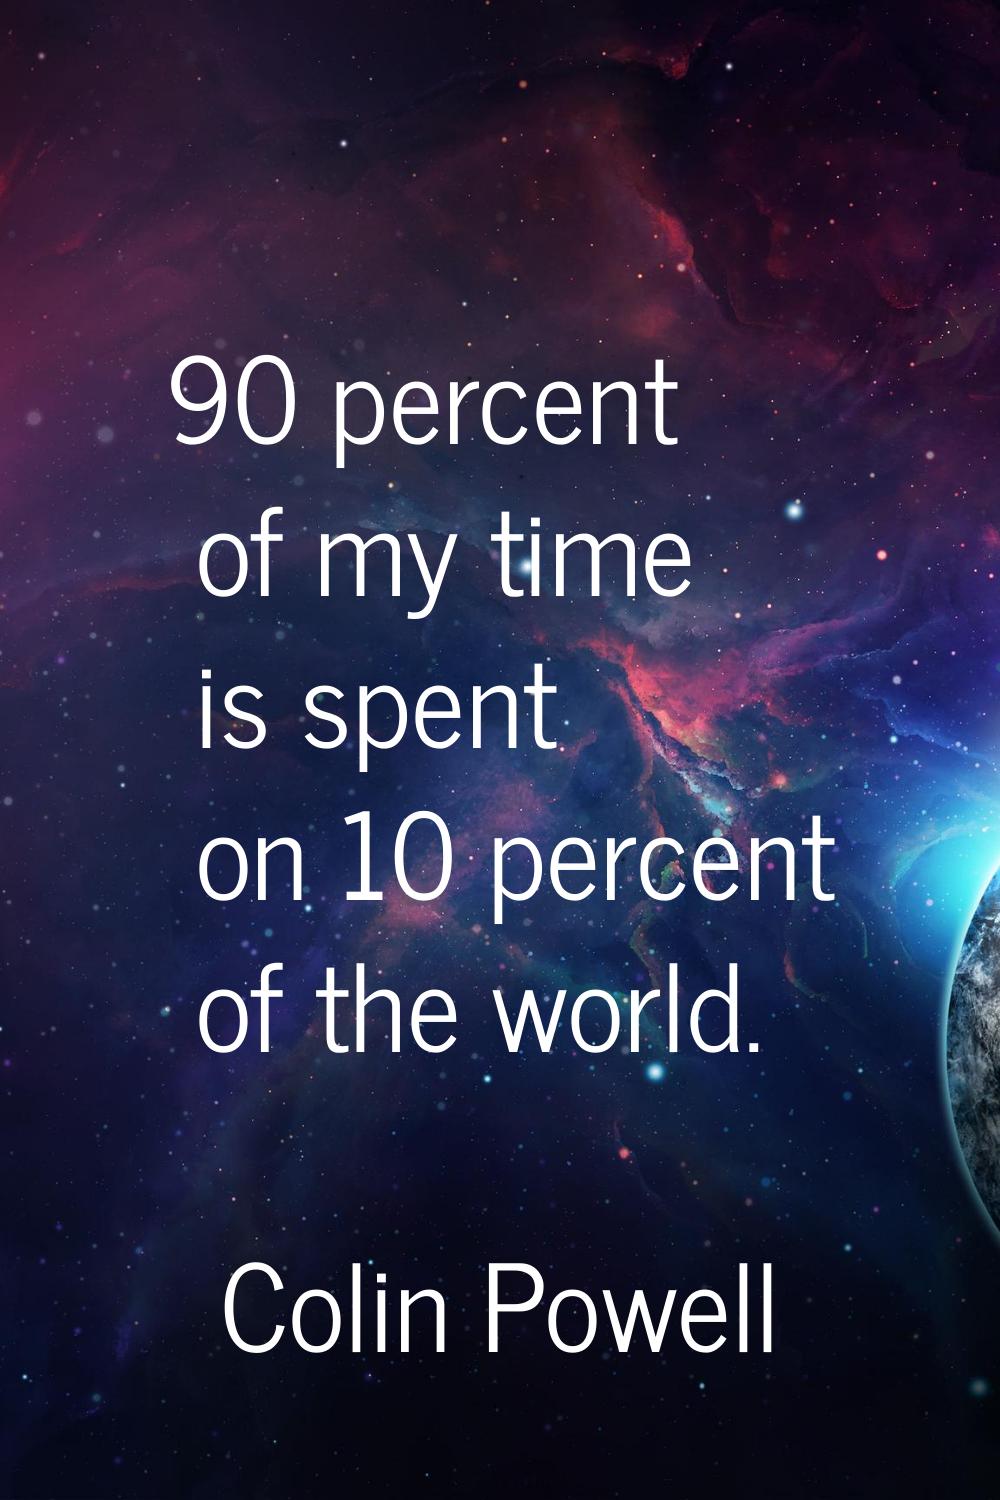 90 percent of my time is spent on 10 percent of the world.